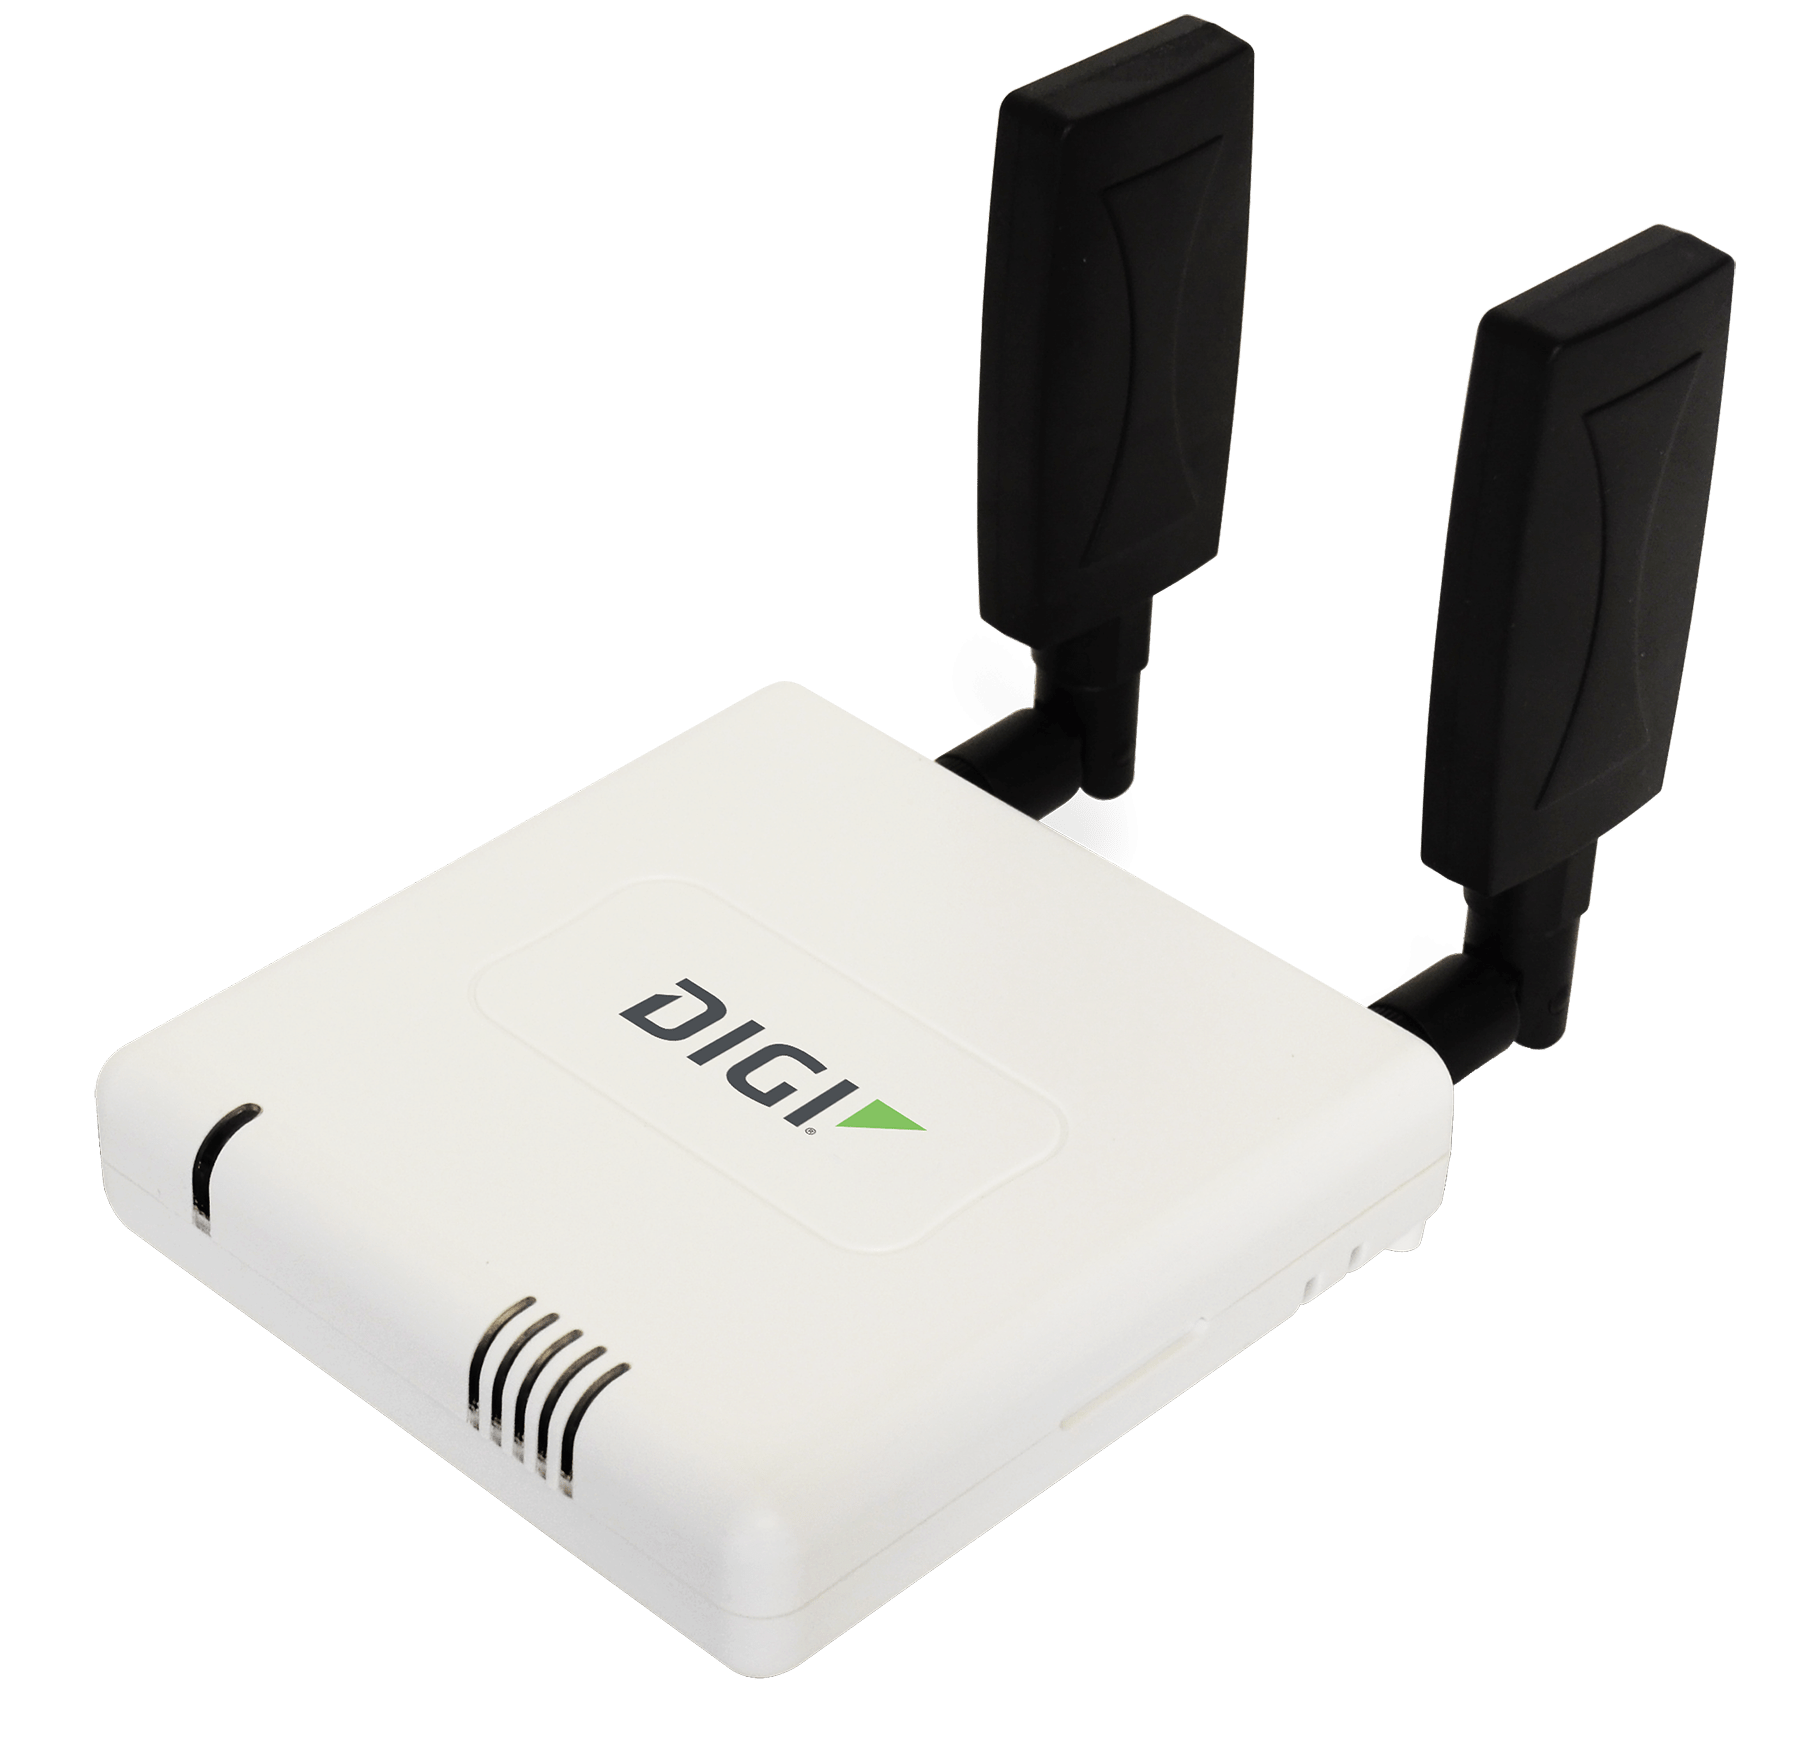 and Integrated Plug-in LTE Modem; CAT 3; LTE/HSPA+ EV-DO Accelerated Modular 6350-SR LTE Router Without Wi-Fi 